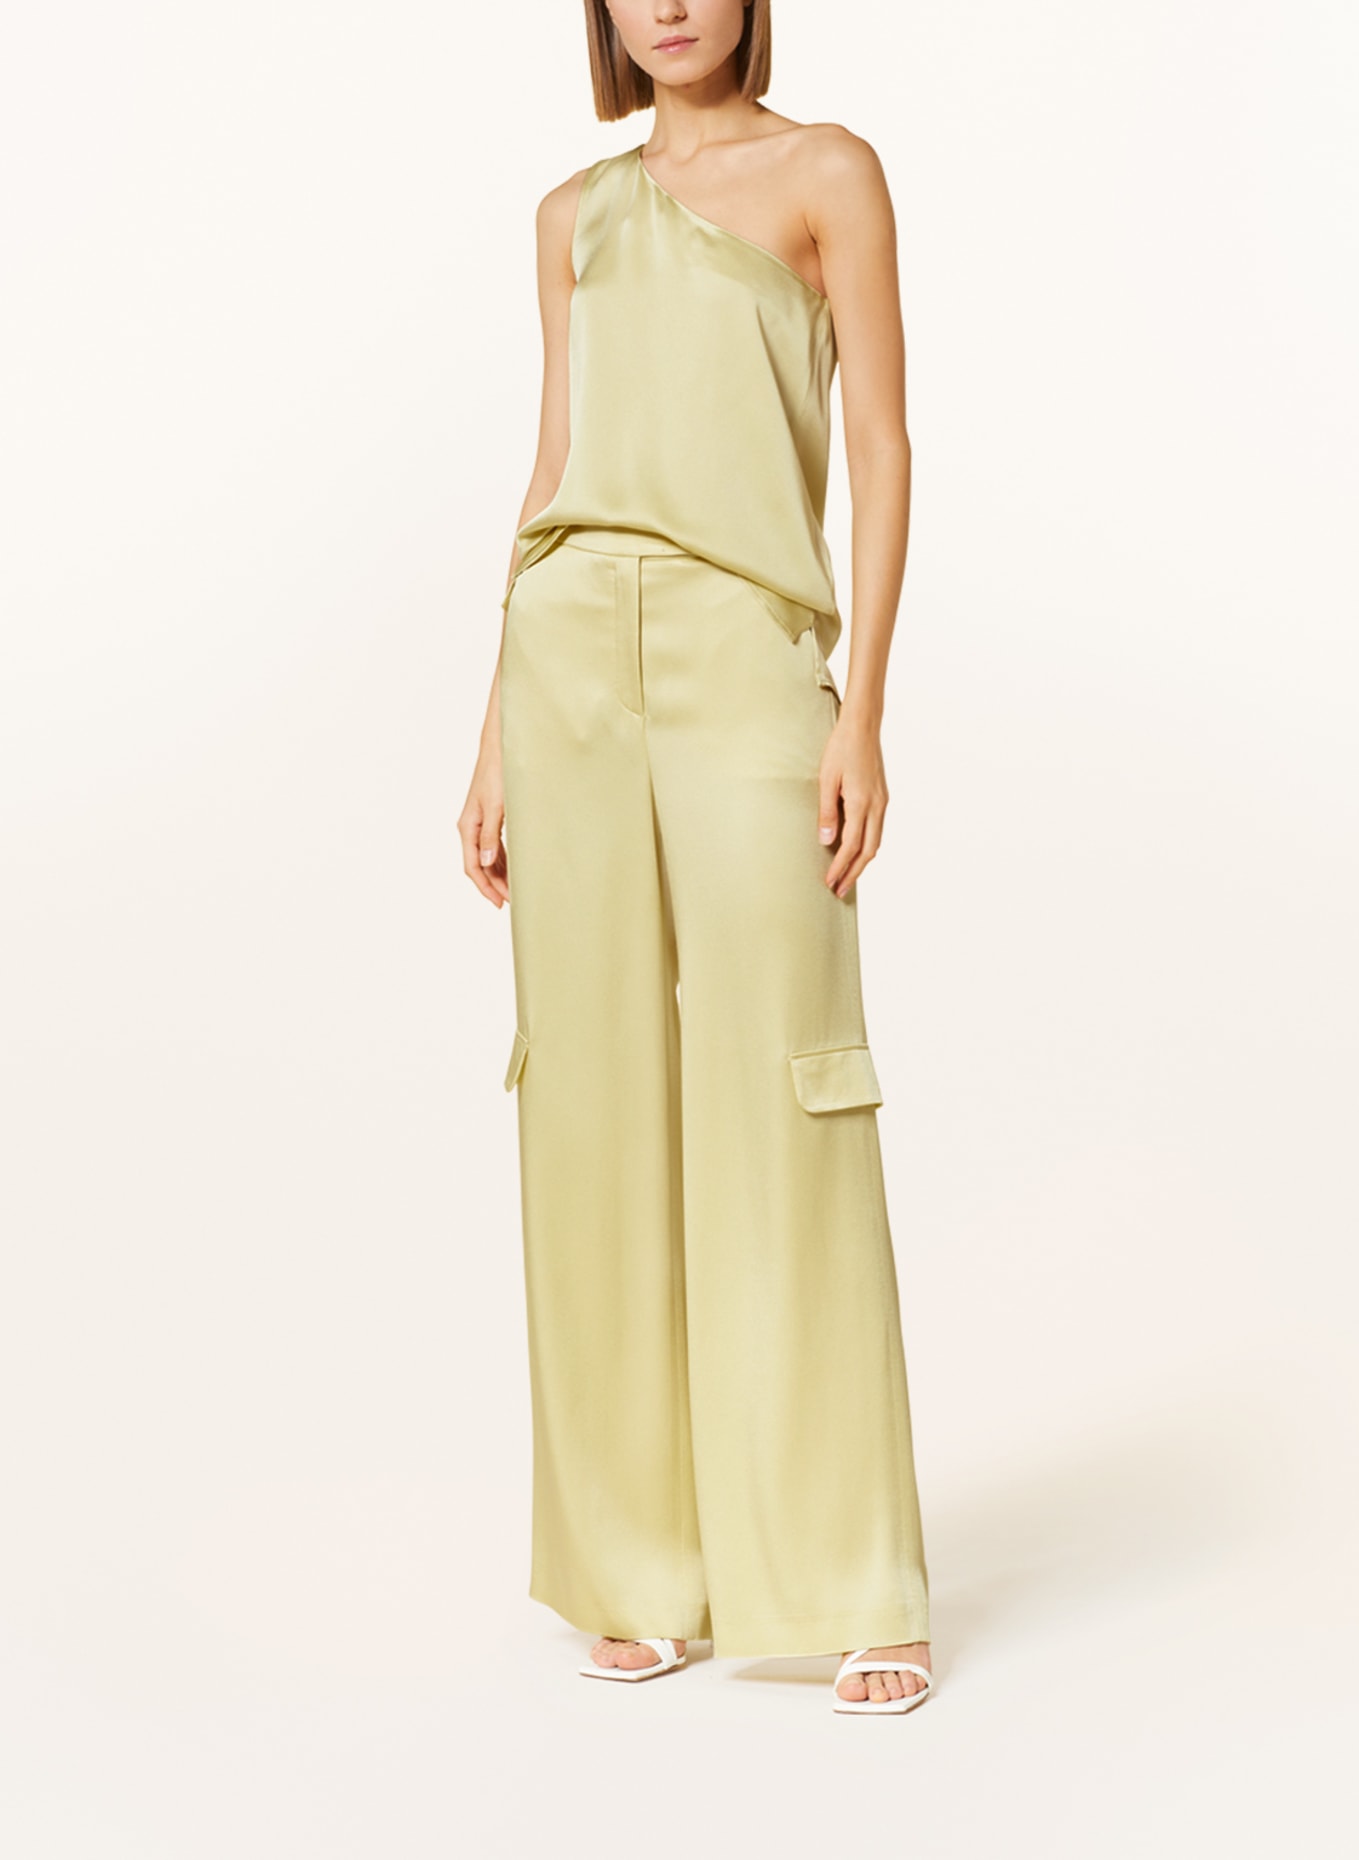 LUISA CERANO One-shoulder top made of satin, Color: LIGHT YELLOW (Image 2)